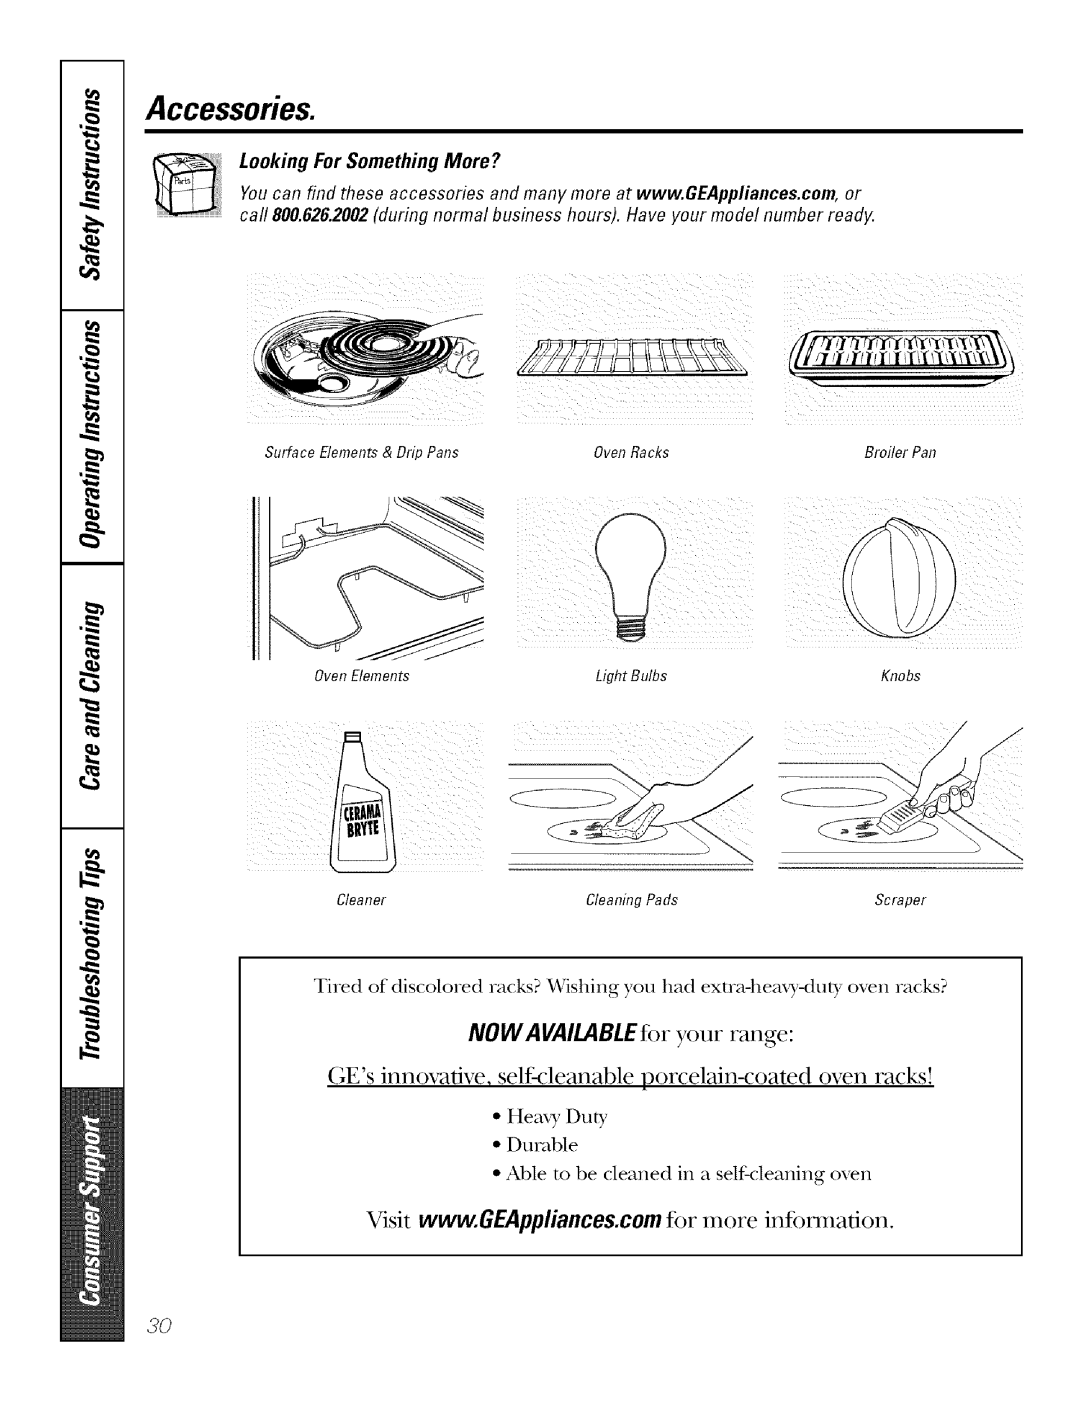 GE Range Accessories, NOW AVAILABLE for your range, Oven Racks, Broiler Pan, Light Bulbs, Knobs, Oven Elements, Cleaner 